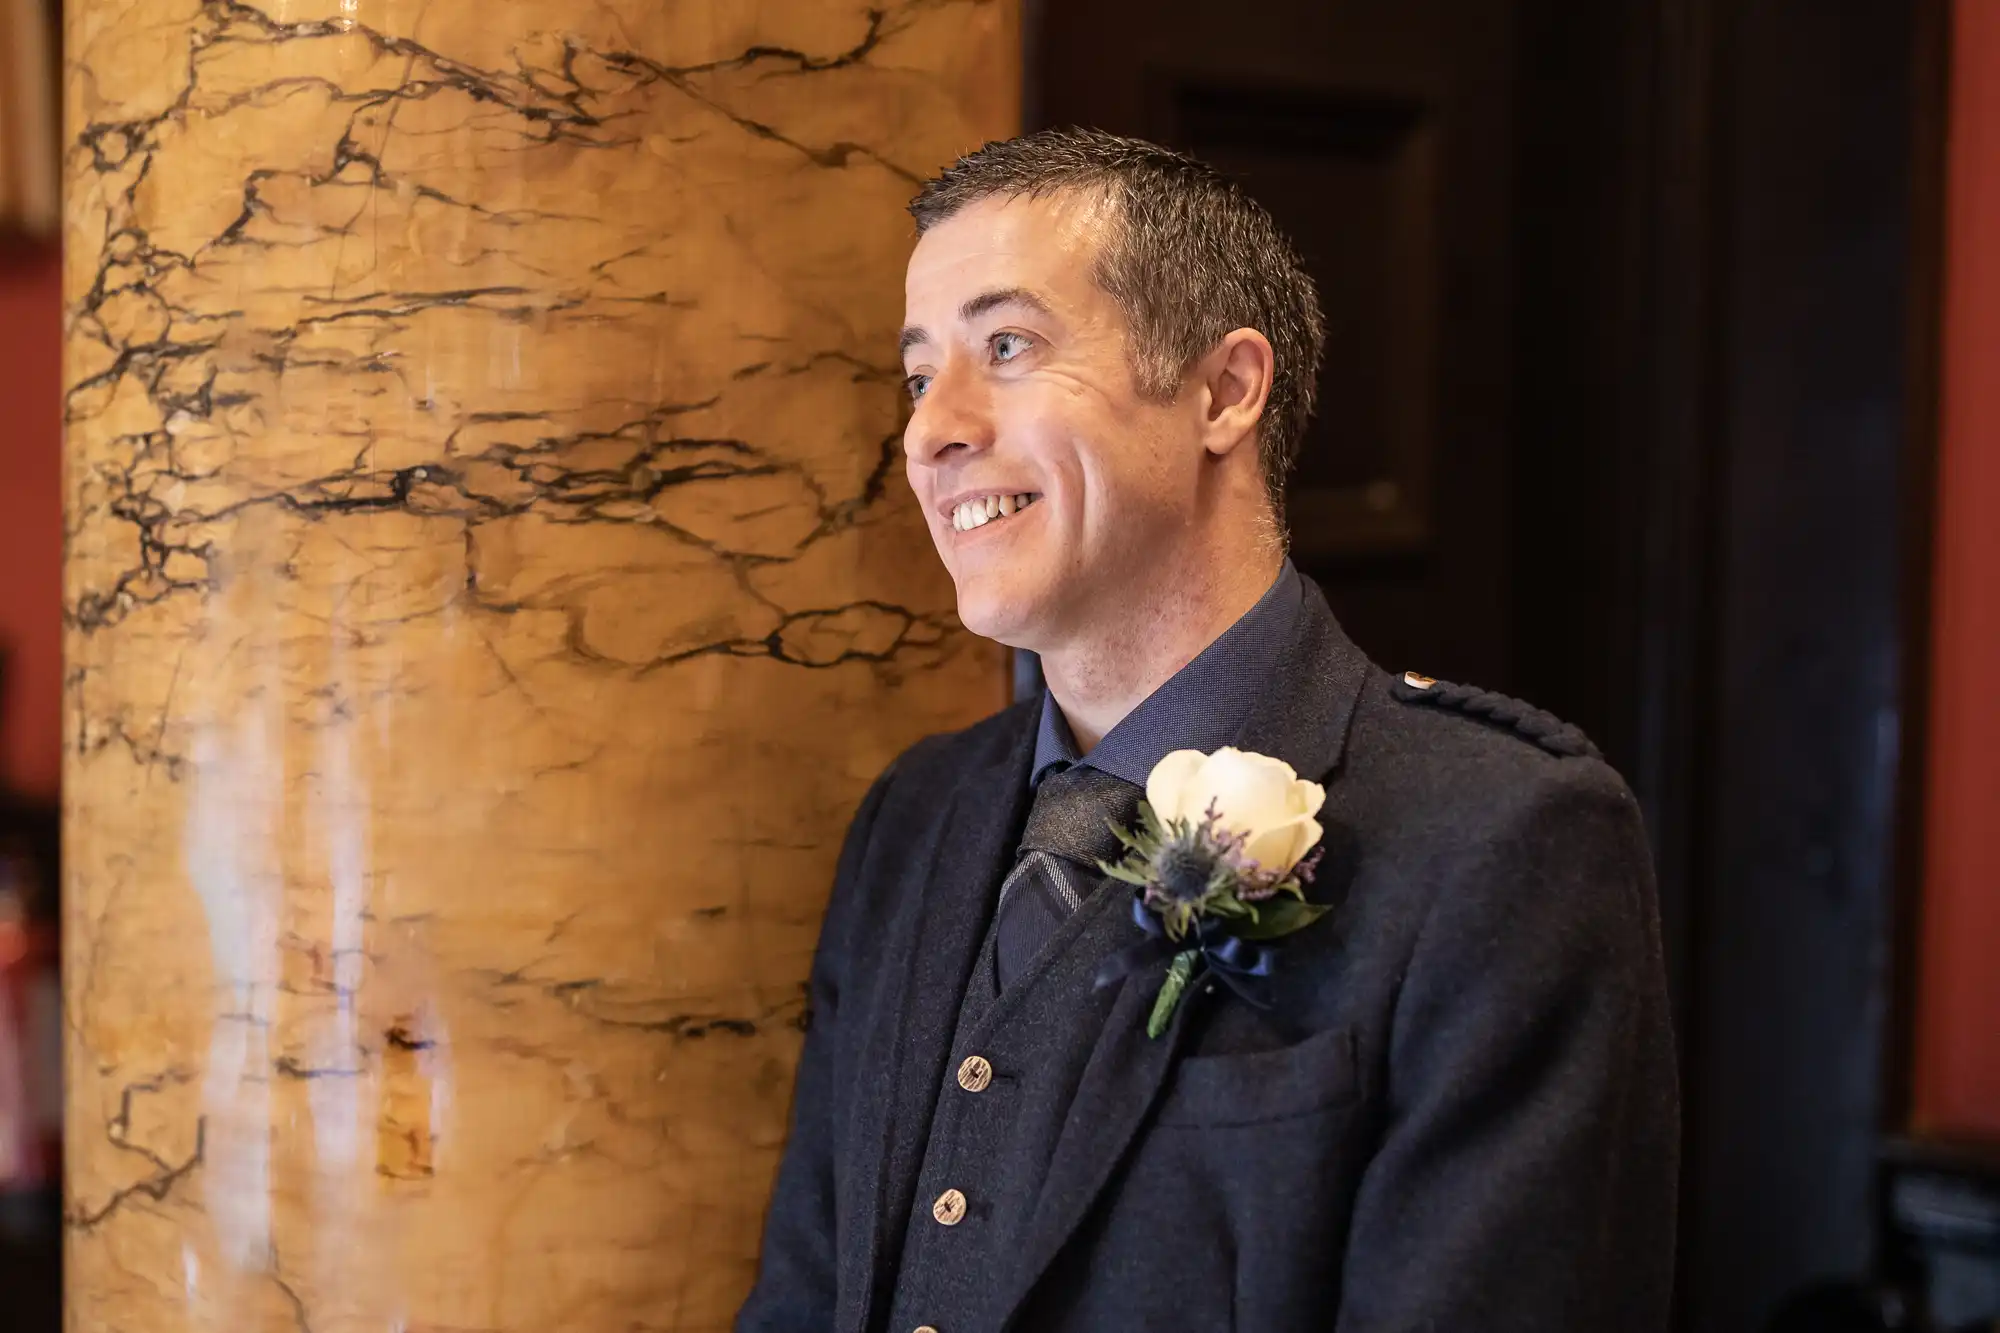 A man in formal attire with a boutonniere smiles while standing next to a marble column.